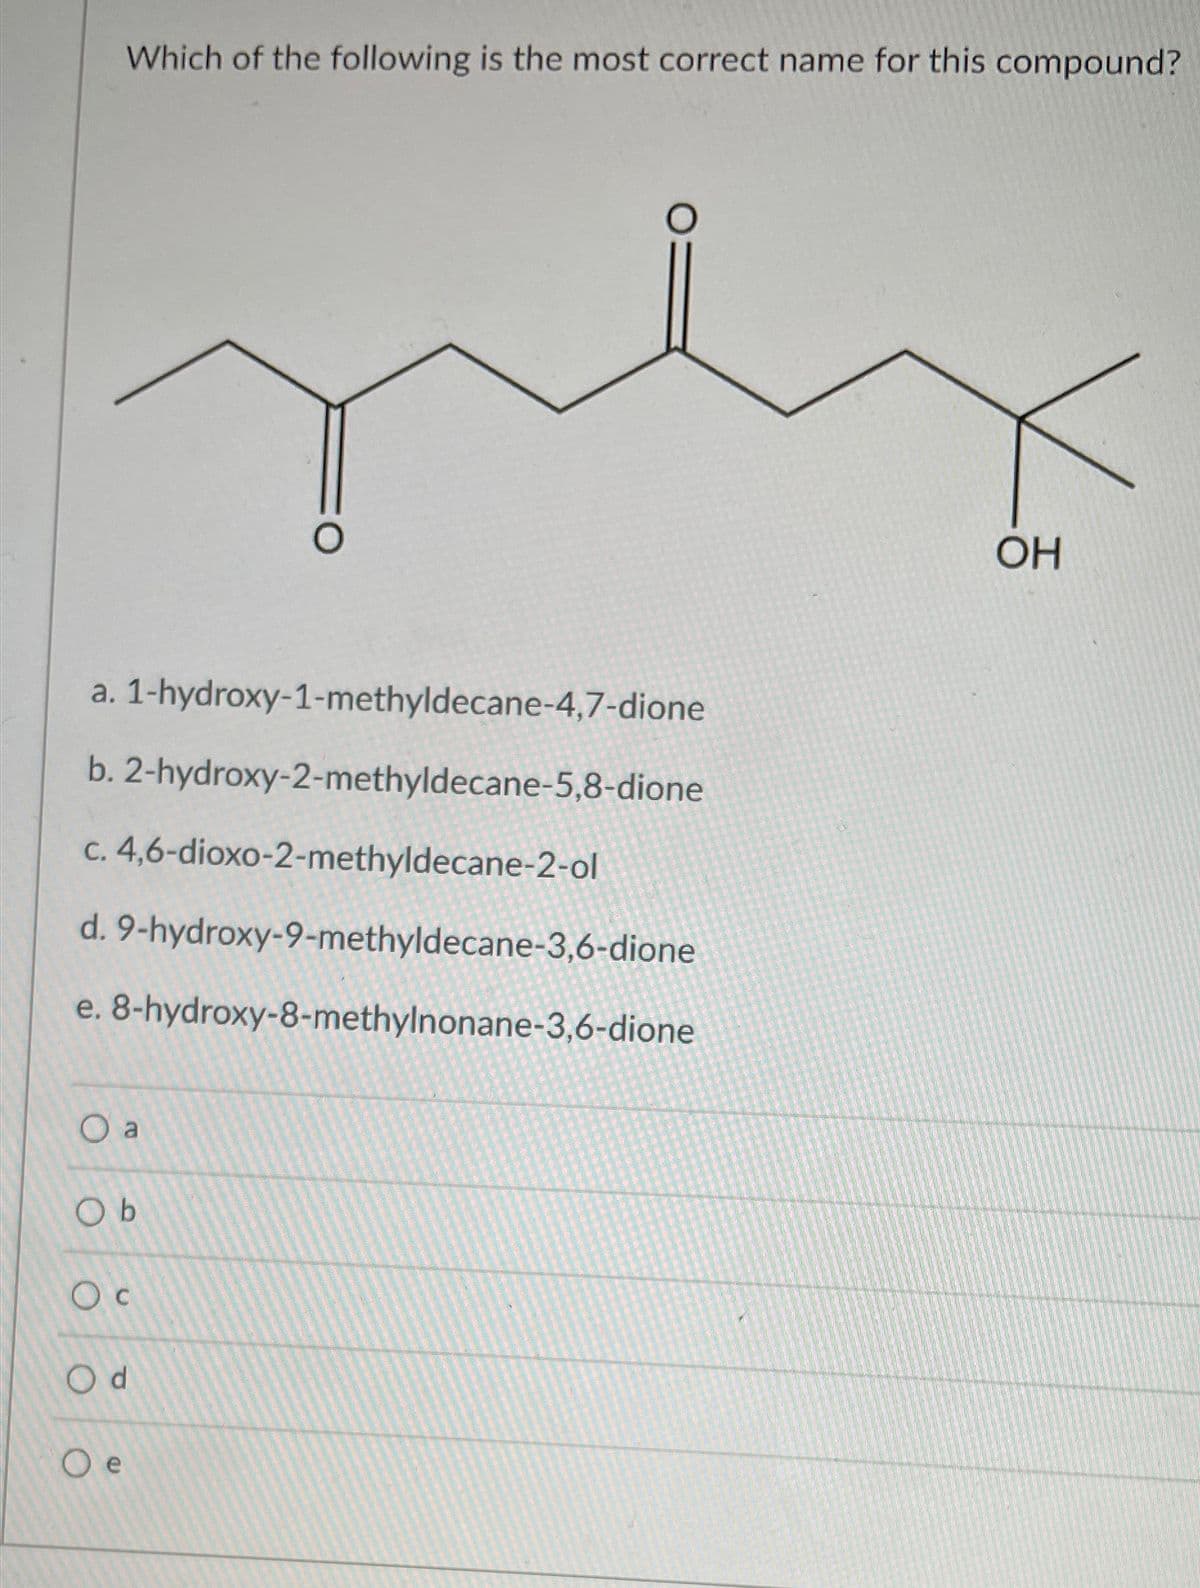 Which of the following is the most correct name for this compound?
OH
a. 1-hydroxy-1-methyldecane-4,7-dione
b. 2-hydroxy-2-methyldecane-5,8-dione
c. 4,6-dioxo-2-methyldecane-2-of
d. 9-hydroxy-9-methyldecane-3,6-dione
e. 8-hydroxy-8-methylnonane-3,6-dione
O a
O b
O c
O e
